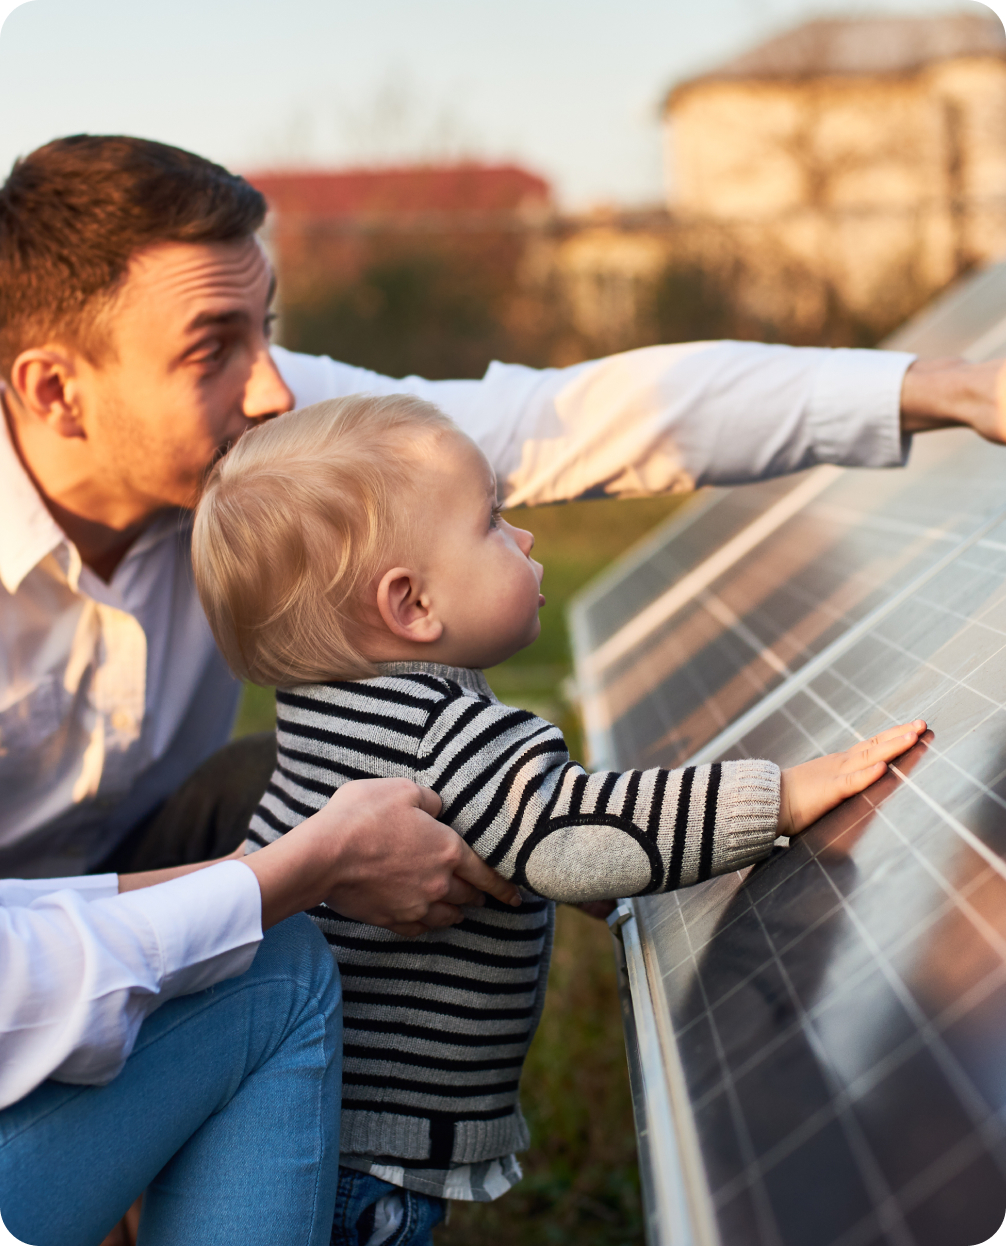 Father and Son looking and touching a solar panel.